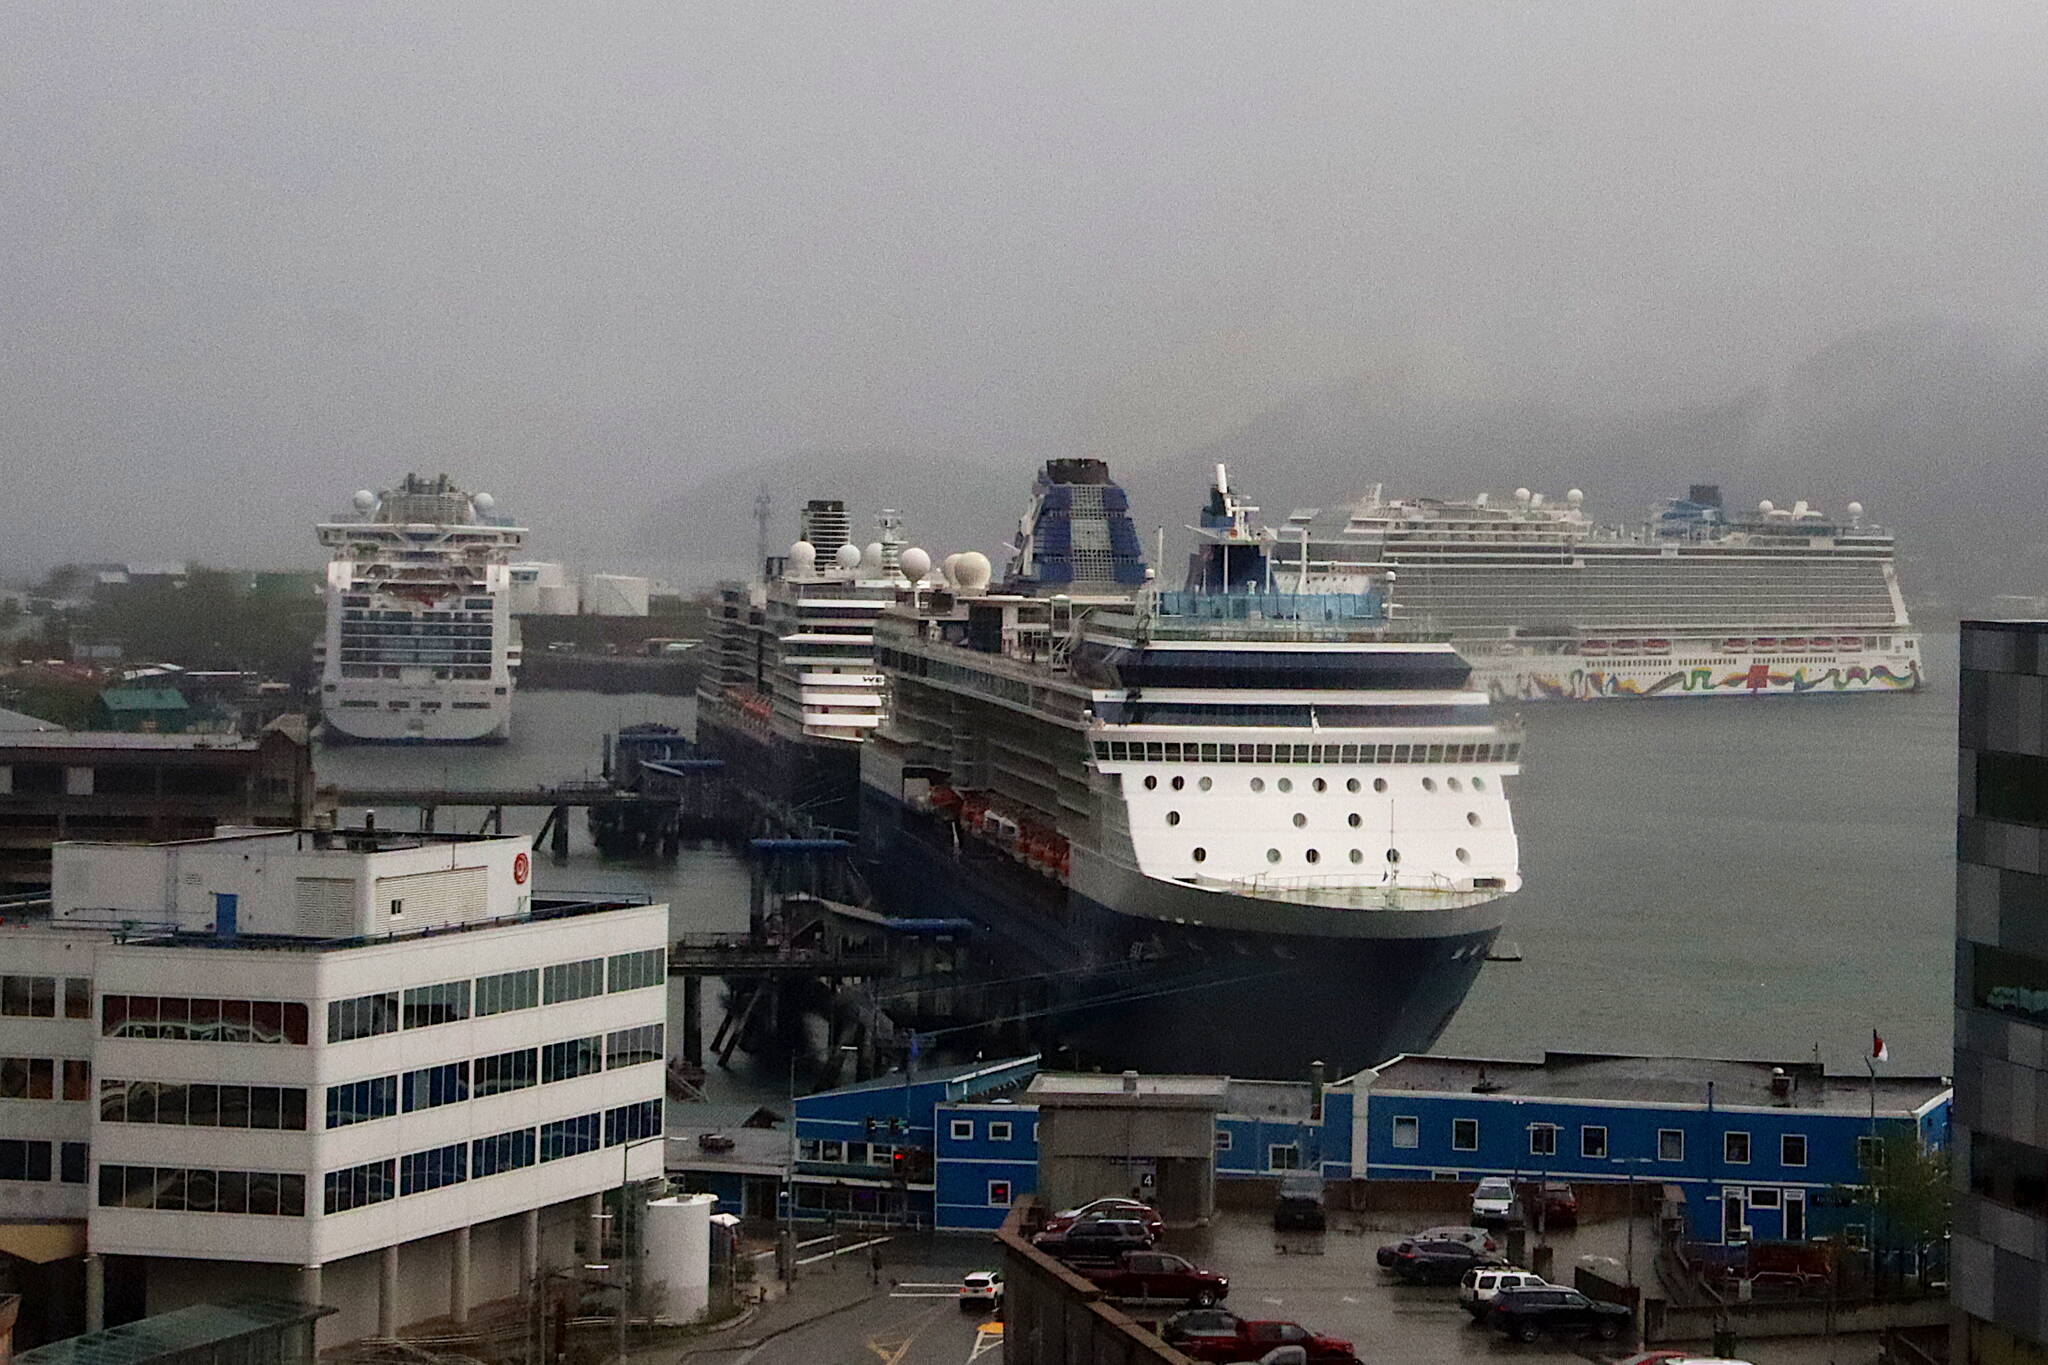 Four cruise ships dock in Juneau on Tuesday afternoon, shortly after the departure of a fifth ship also in town during the day. (Mark Sabbatini / Juneau Empire)